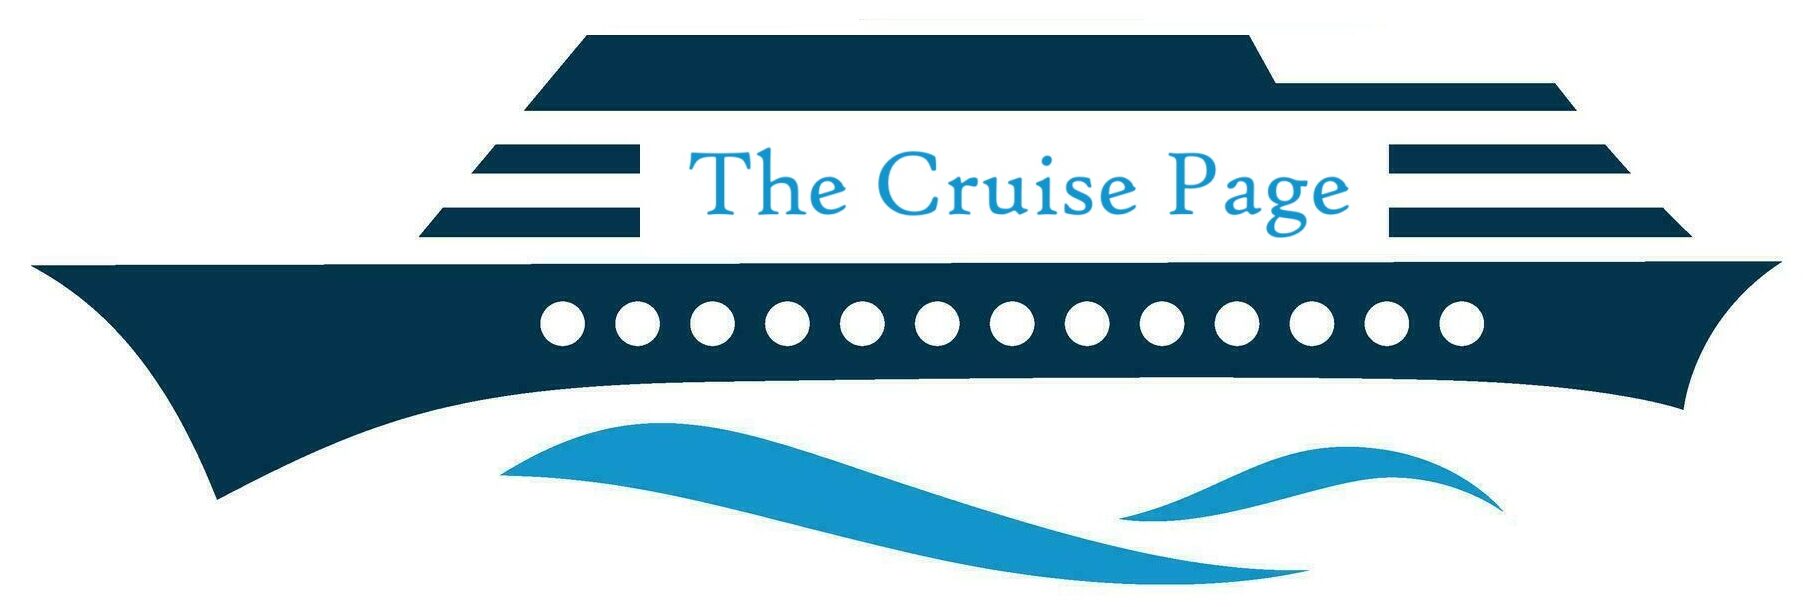 The Cruise page